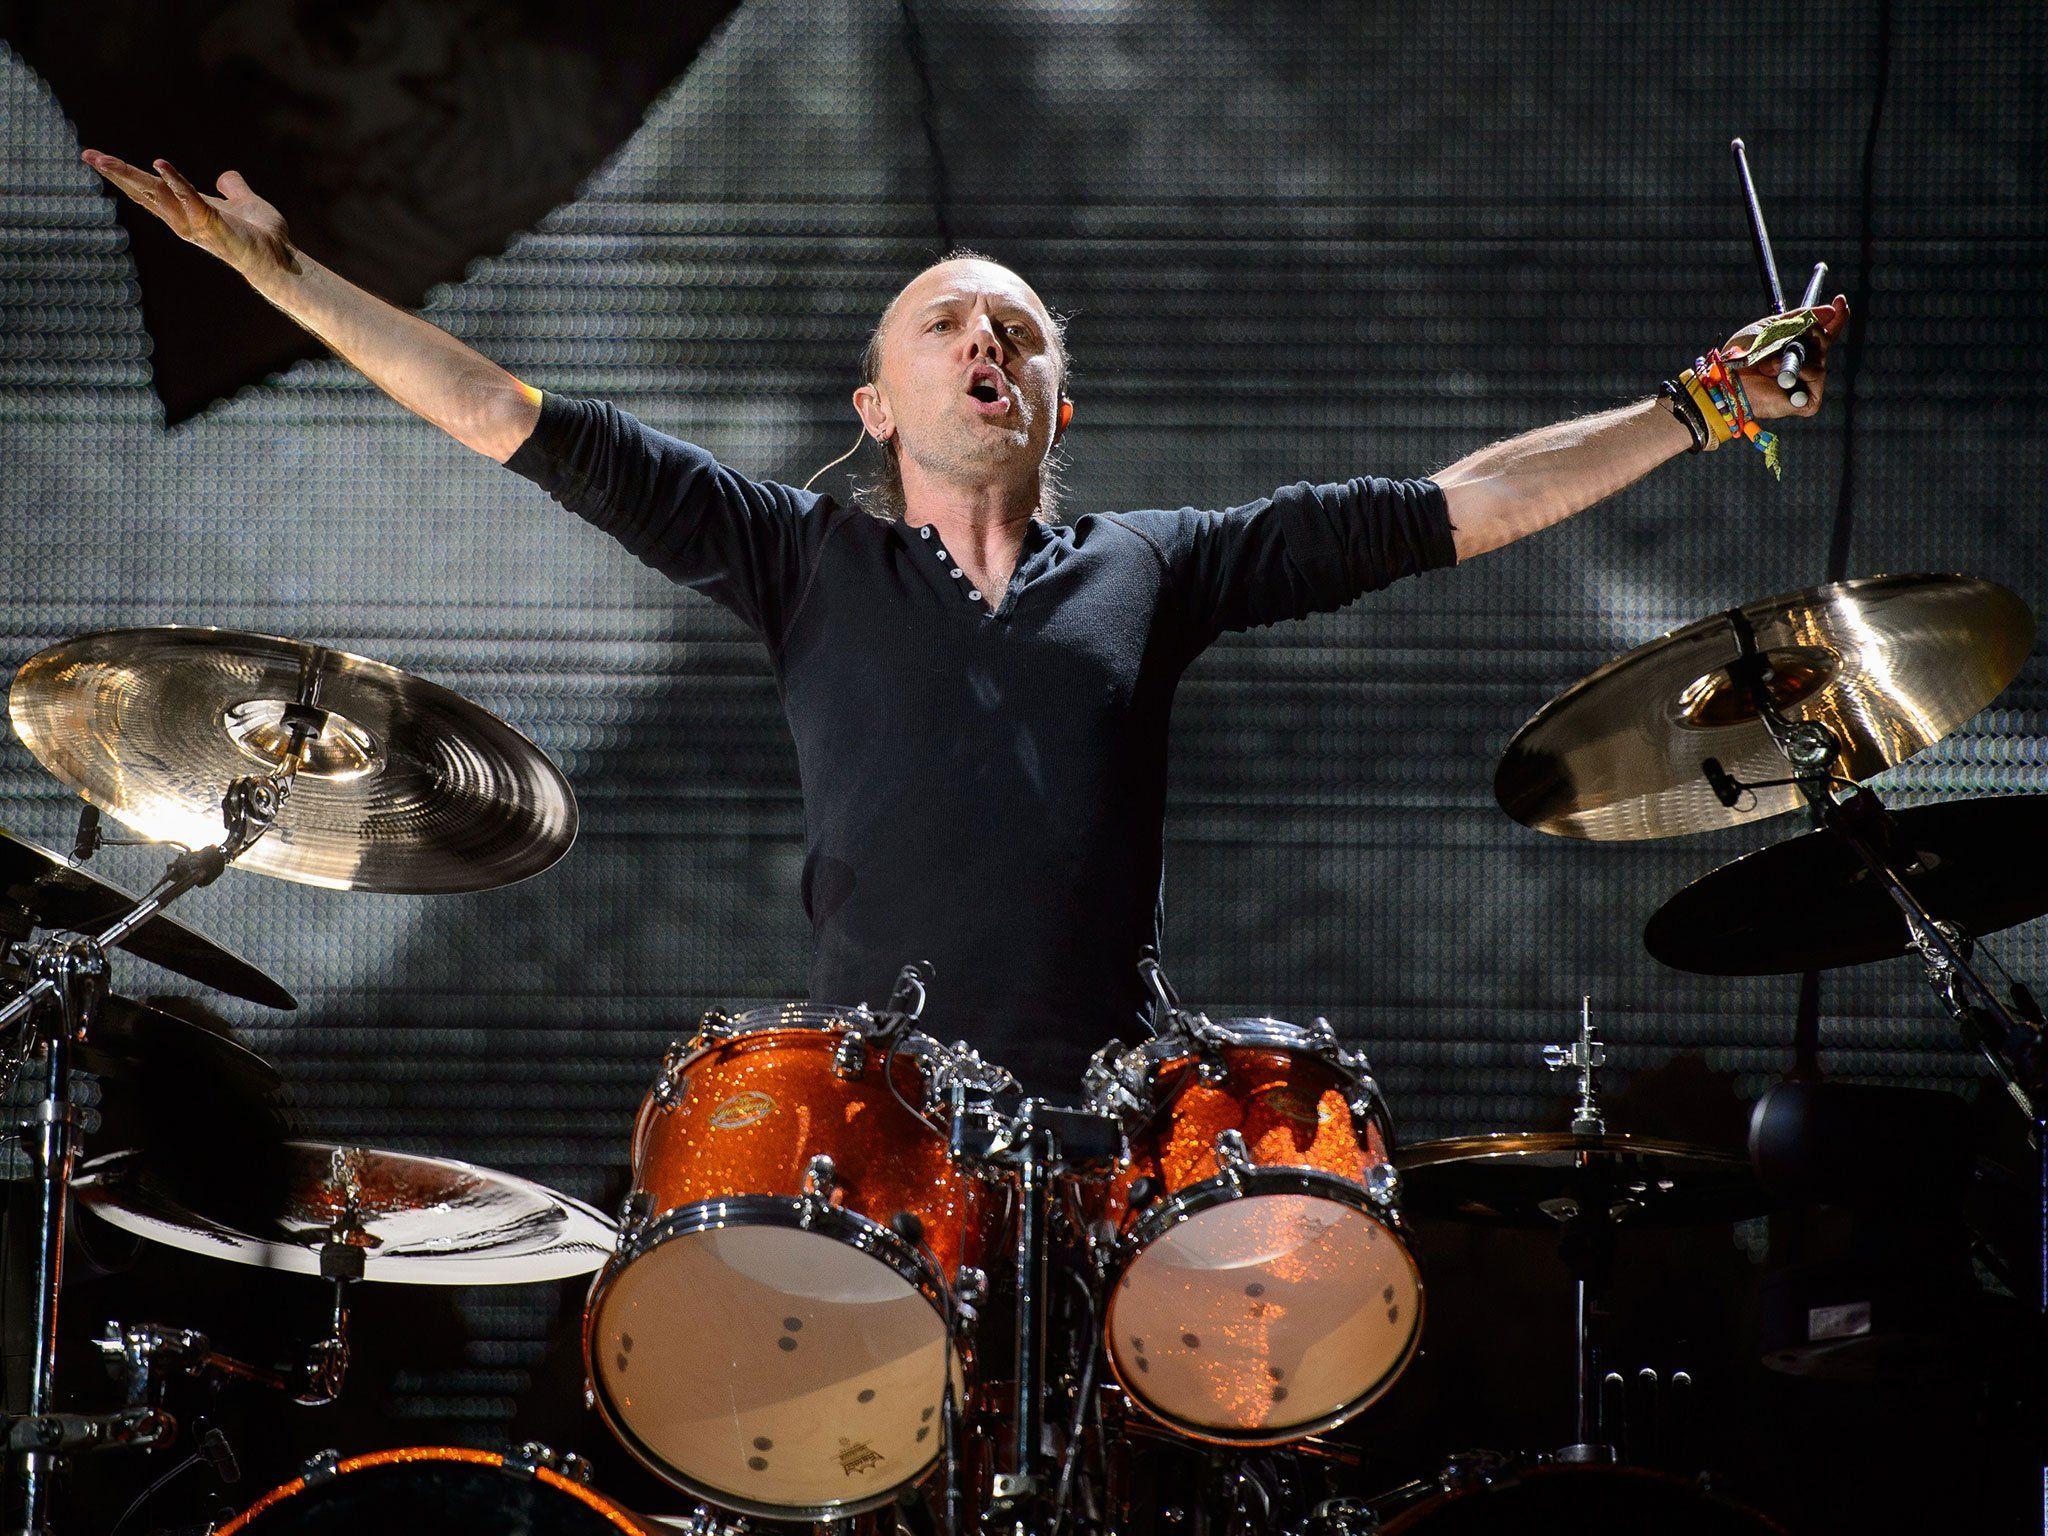 Metallica's Lars Ulrich outs himself as Oasis fan and describes them